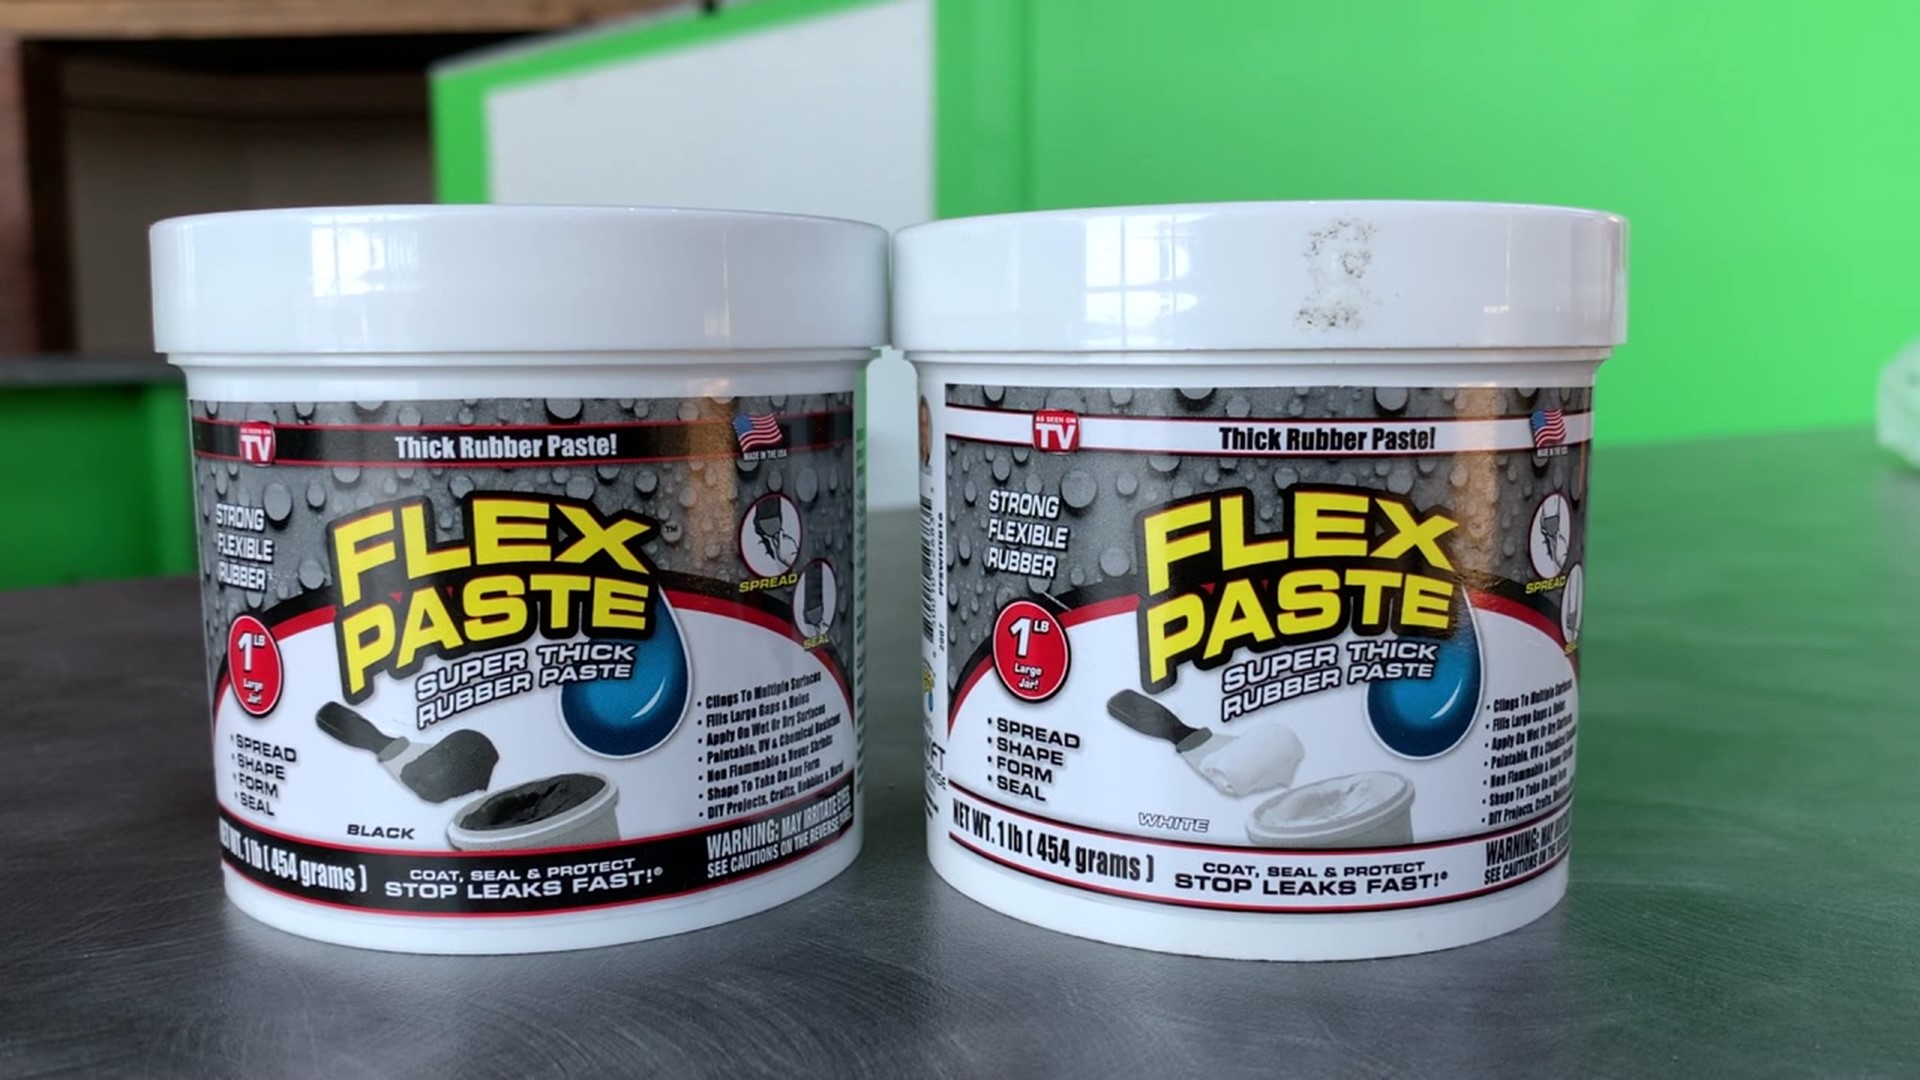 Flex Paste is a super thick rubberized paste that you can spread, shape, form, and seal on pretty much everything.